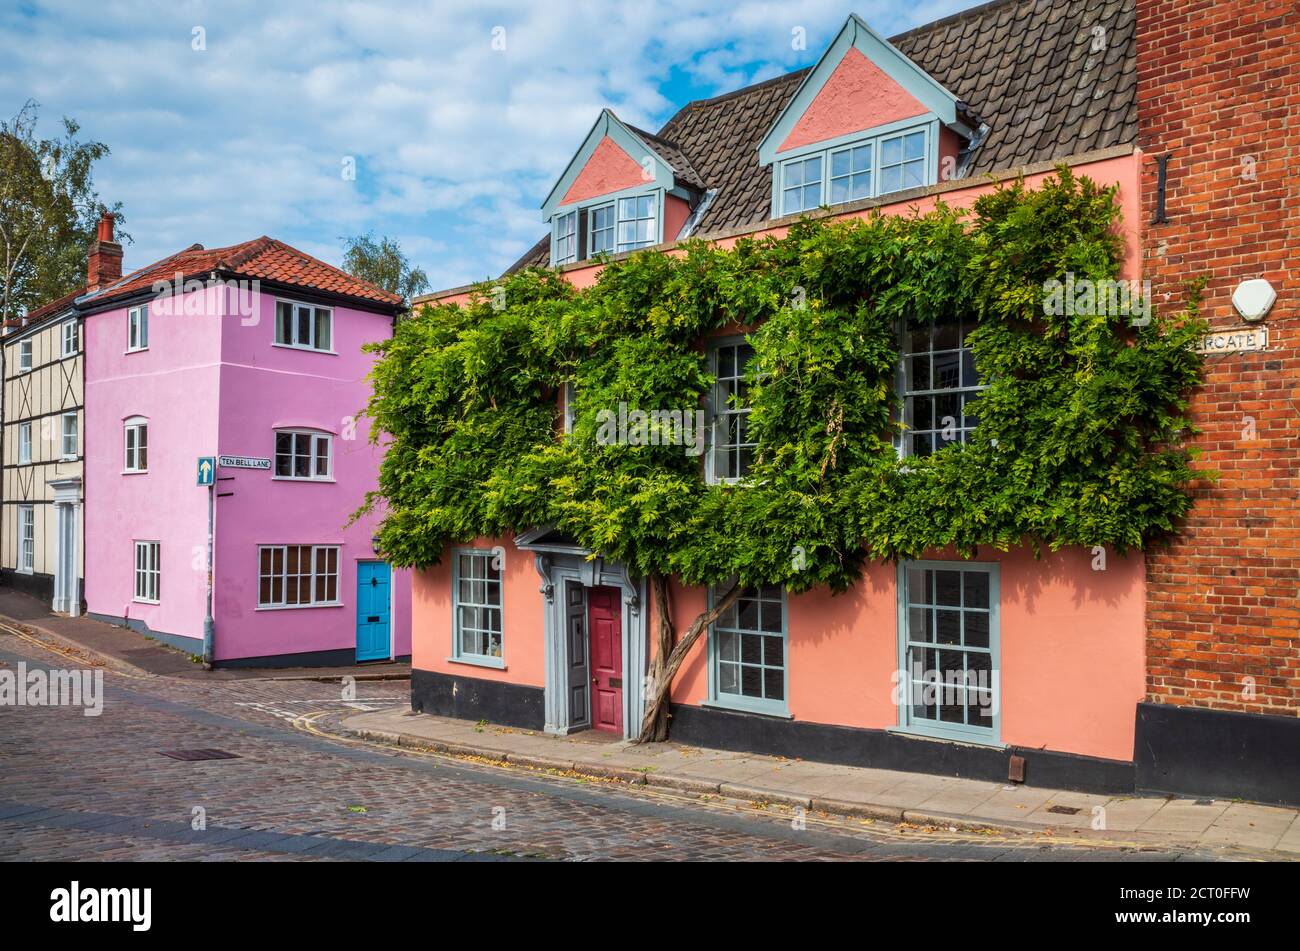 Pottergate Norwich UK - attractive houses in the historic Norwich Lanes area. Pink house is 95 Pottergate.  Norwich Tourism. Historic Norwich Stock Photo